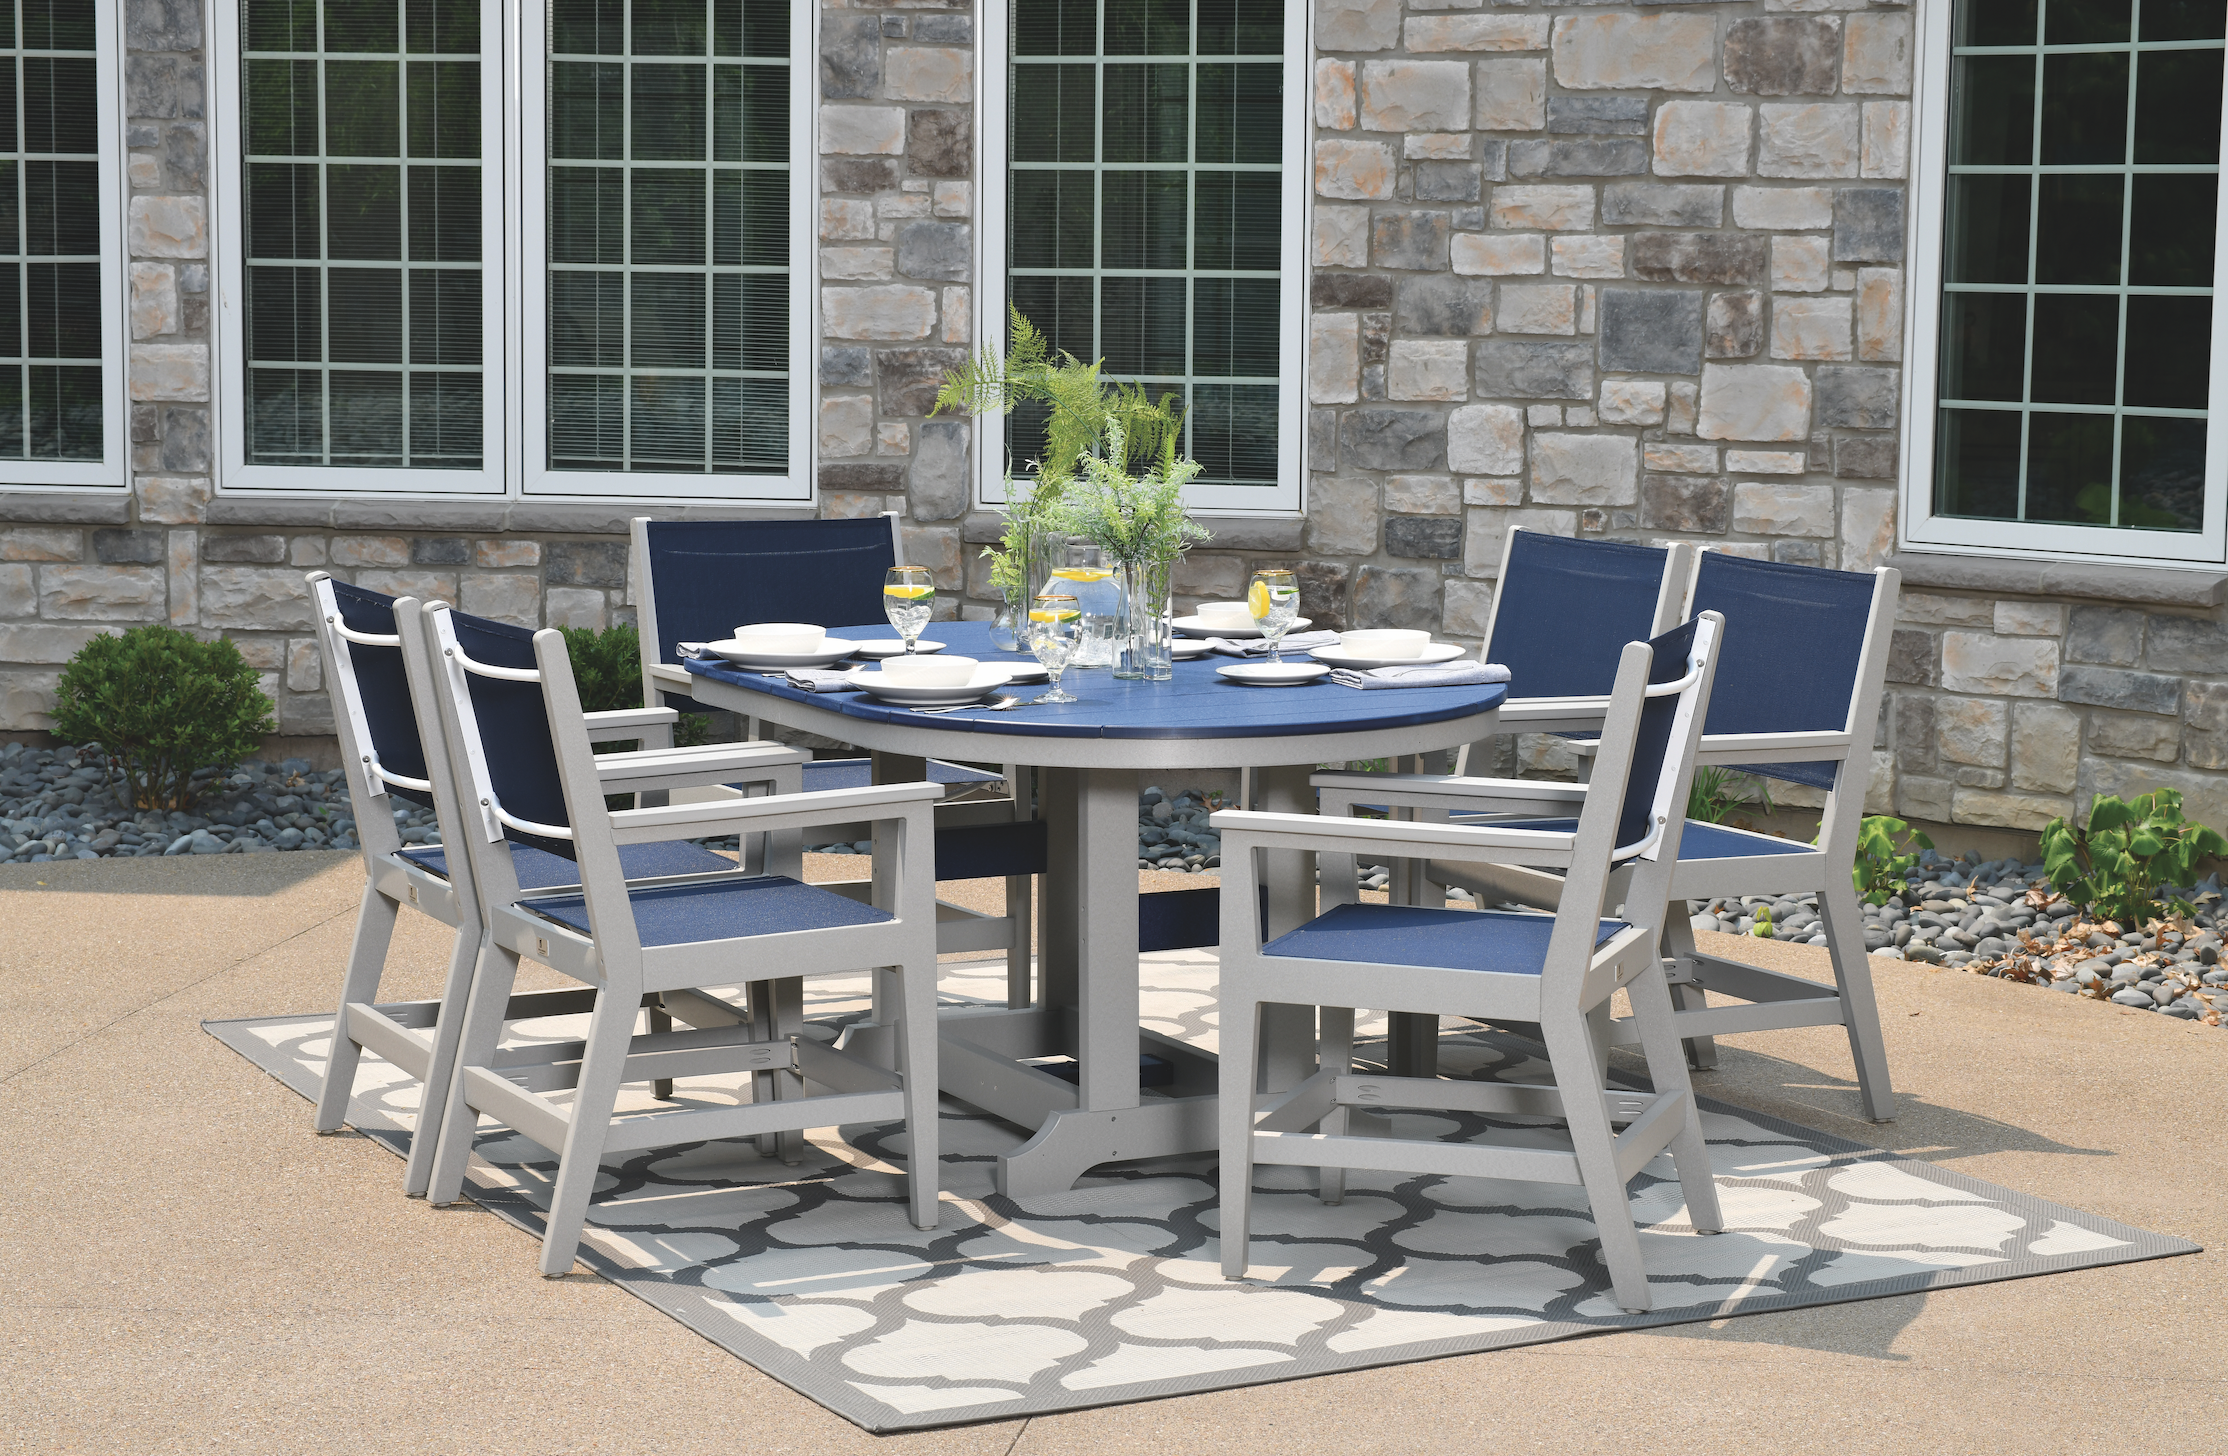  Garden class 44” x 64” oblong table (dining height) in navy blue on light gray with mayhew sling dining arm chairs in light gray. Sling in logan ocean. 